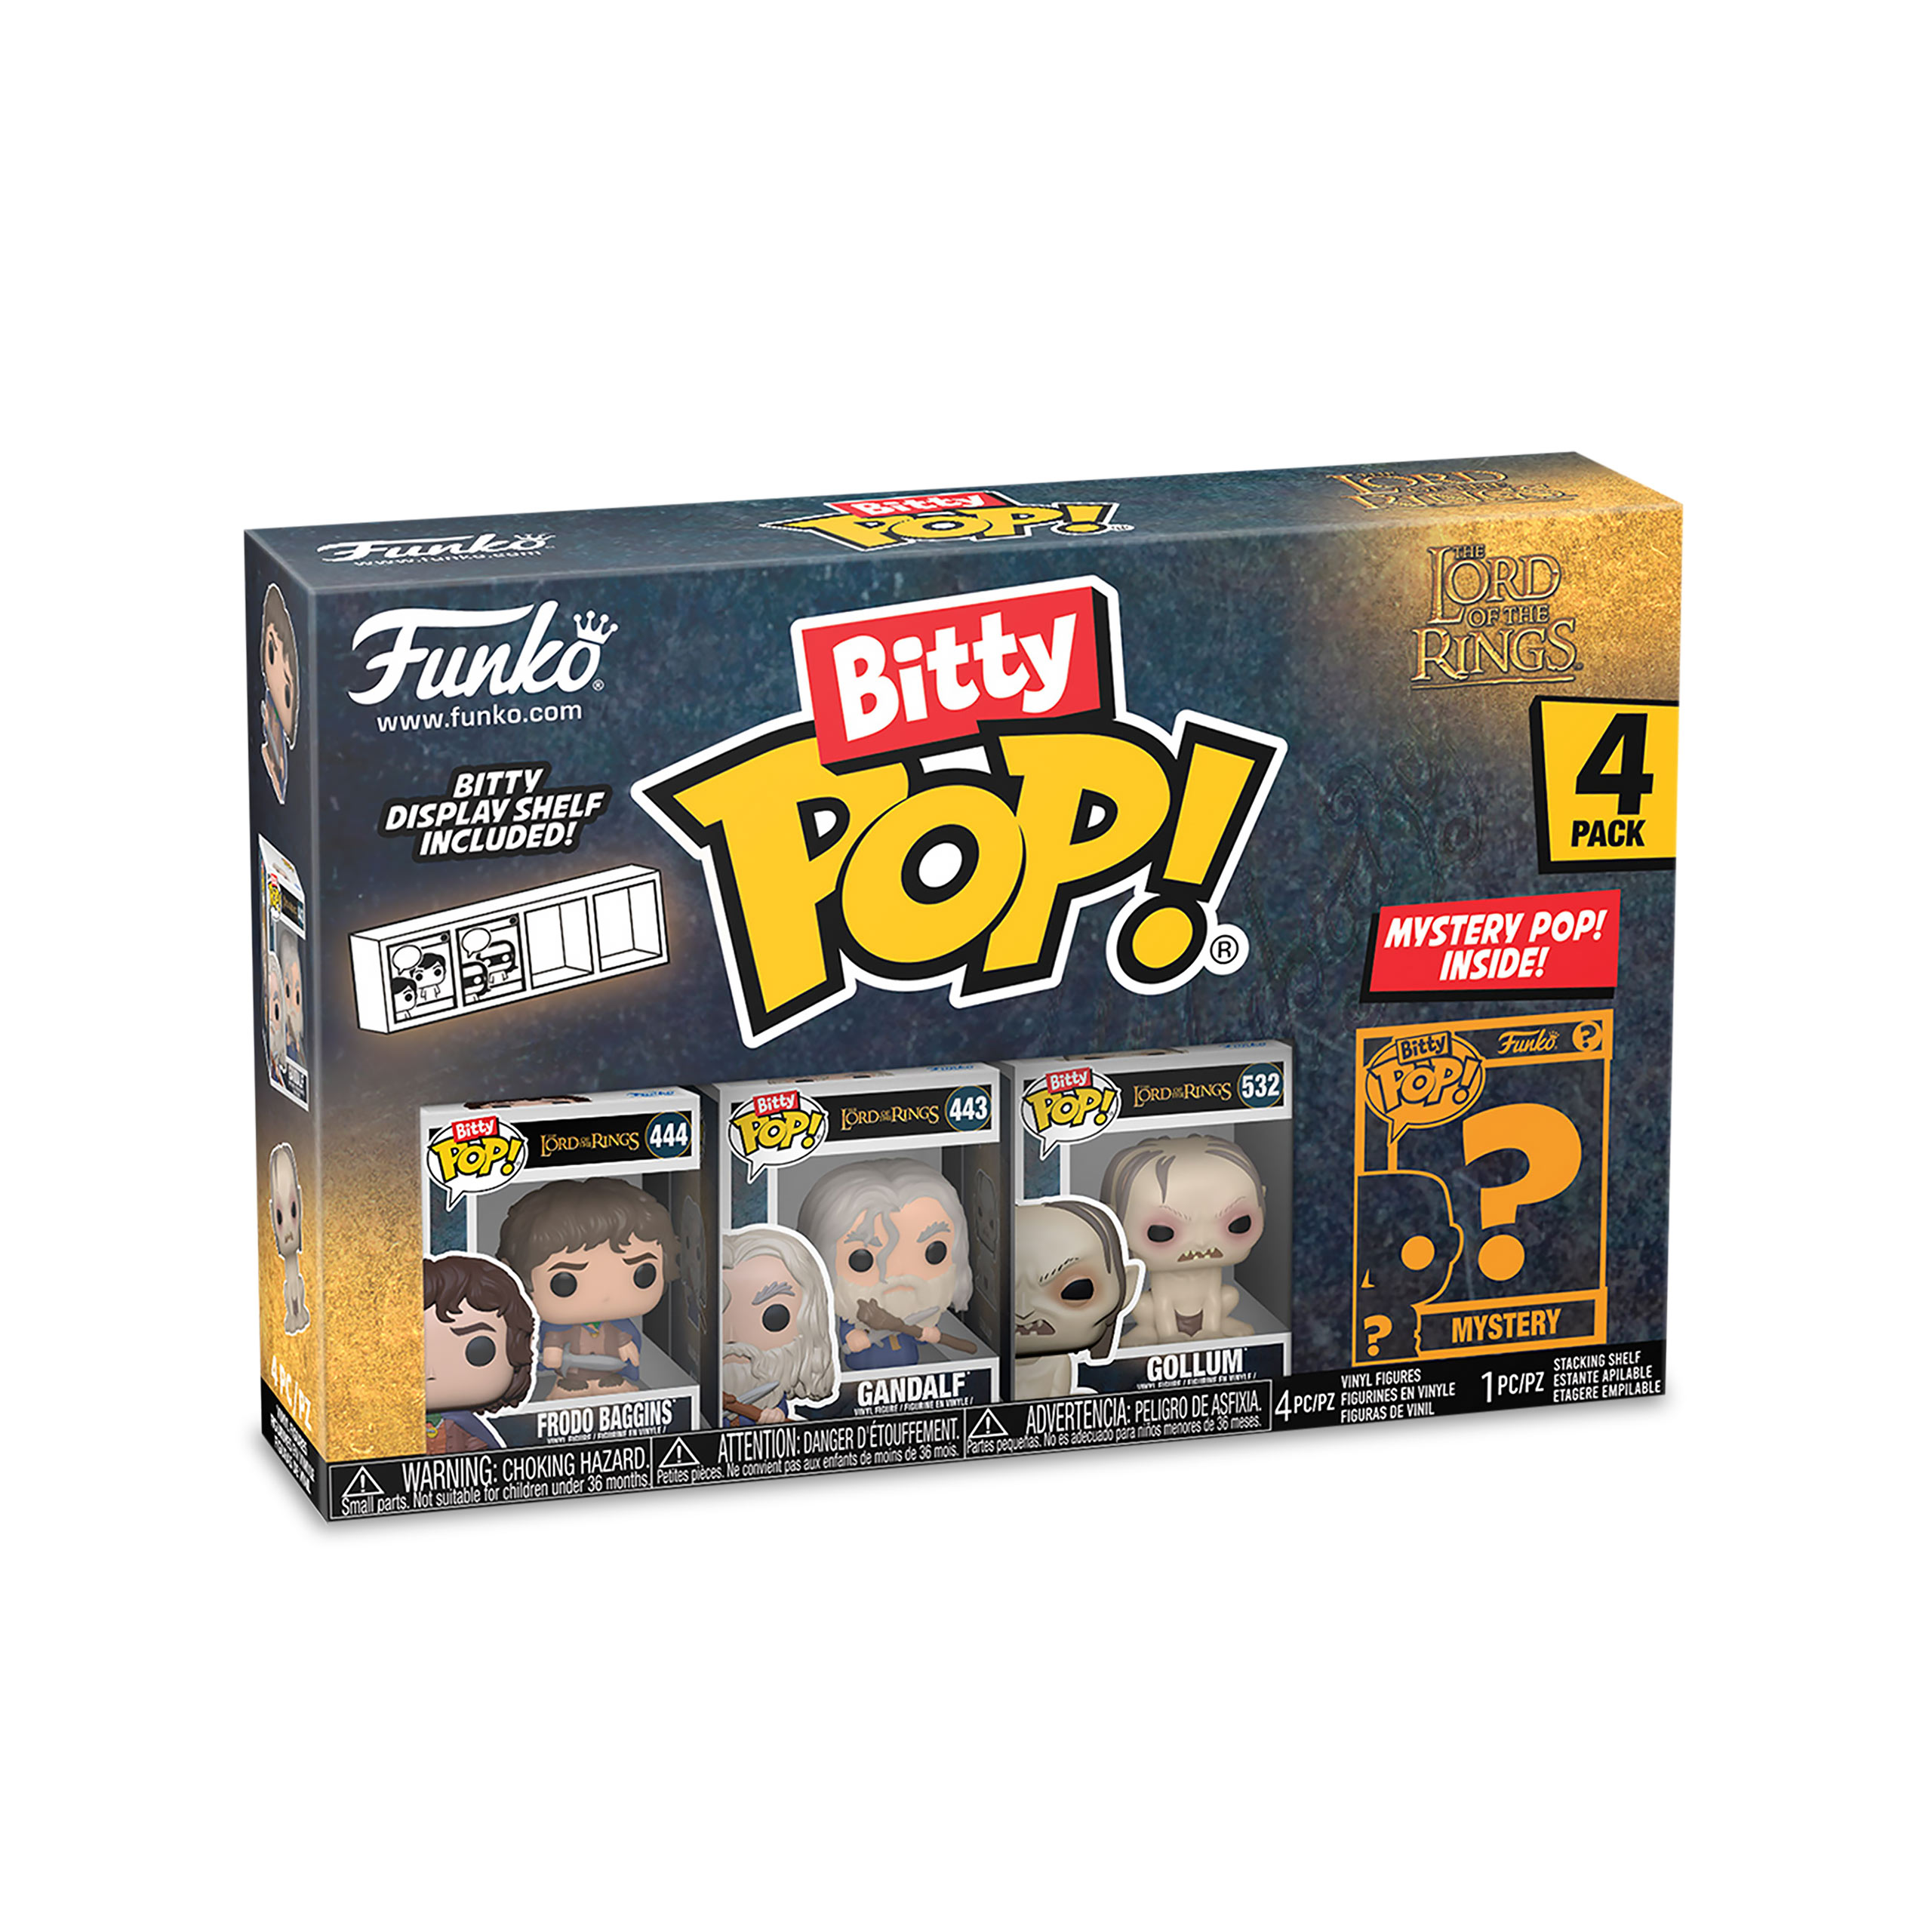 Lord of the Rings - Frodo Funko Bitty Pop 4 figure set